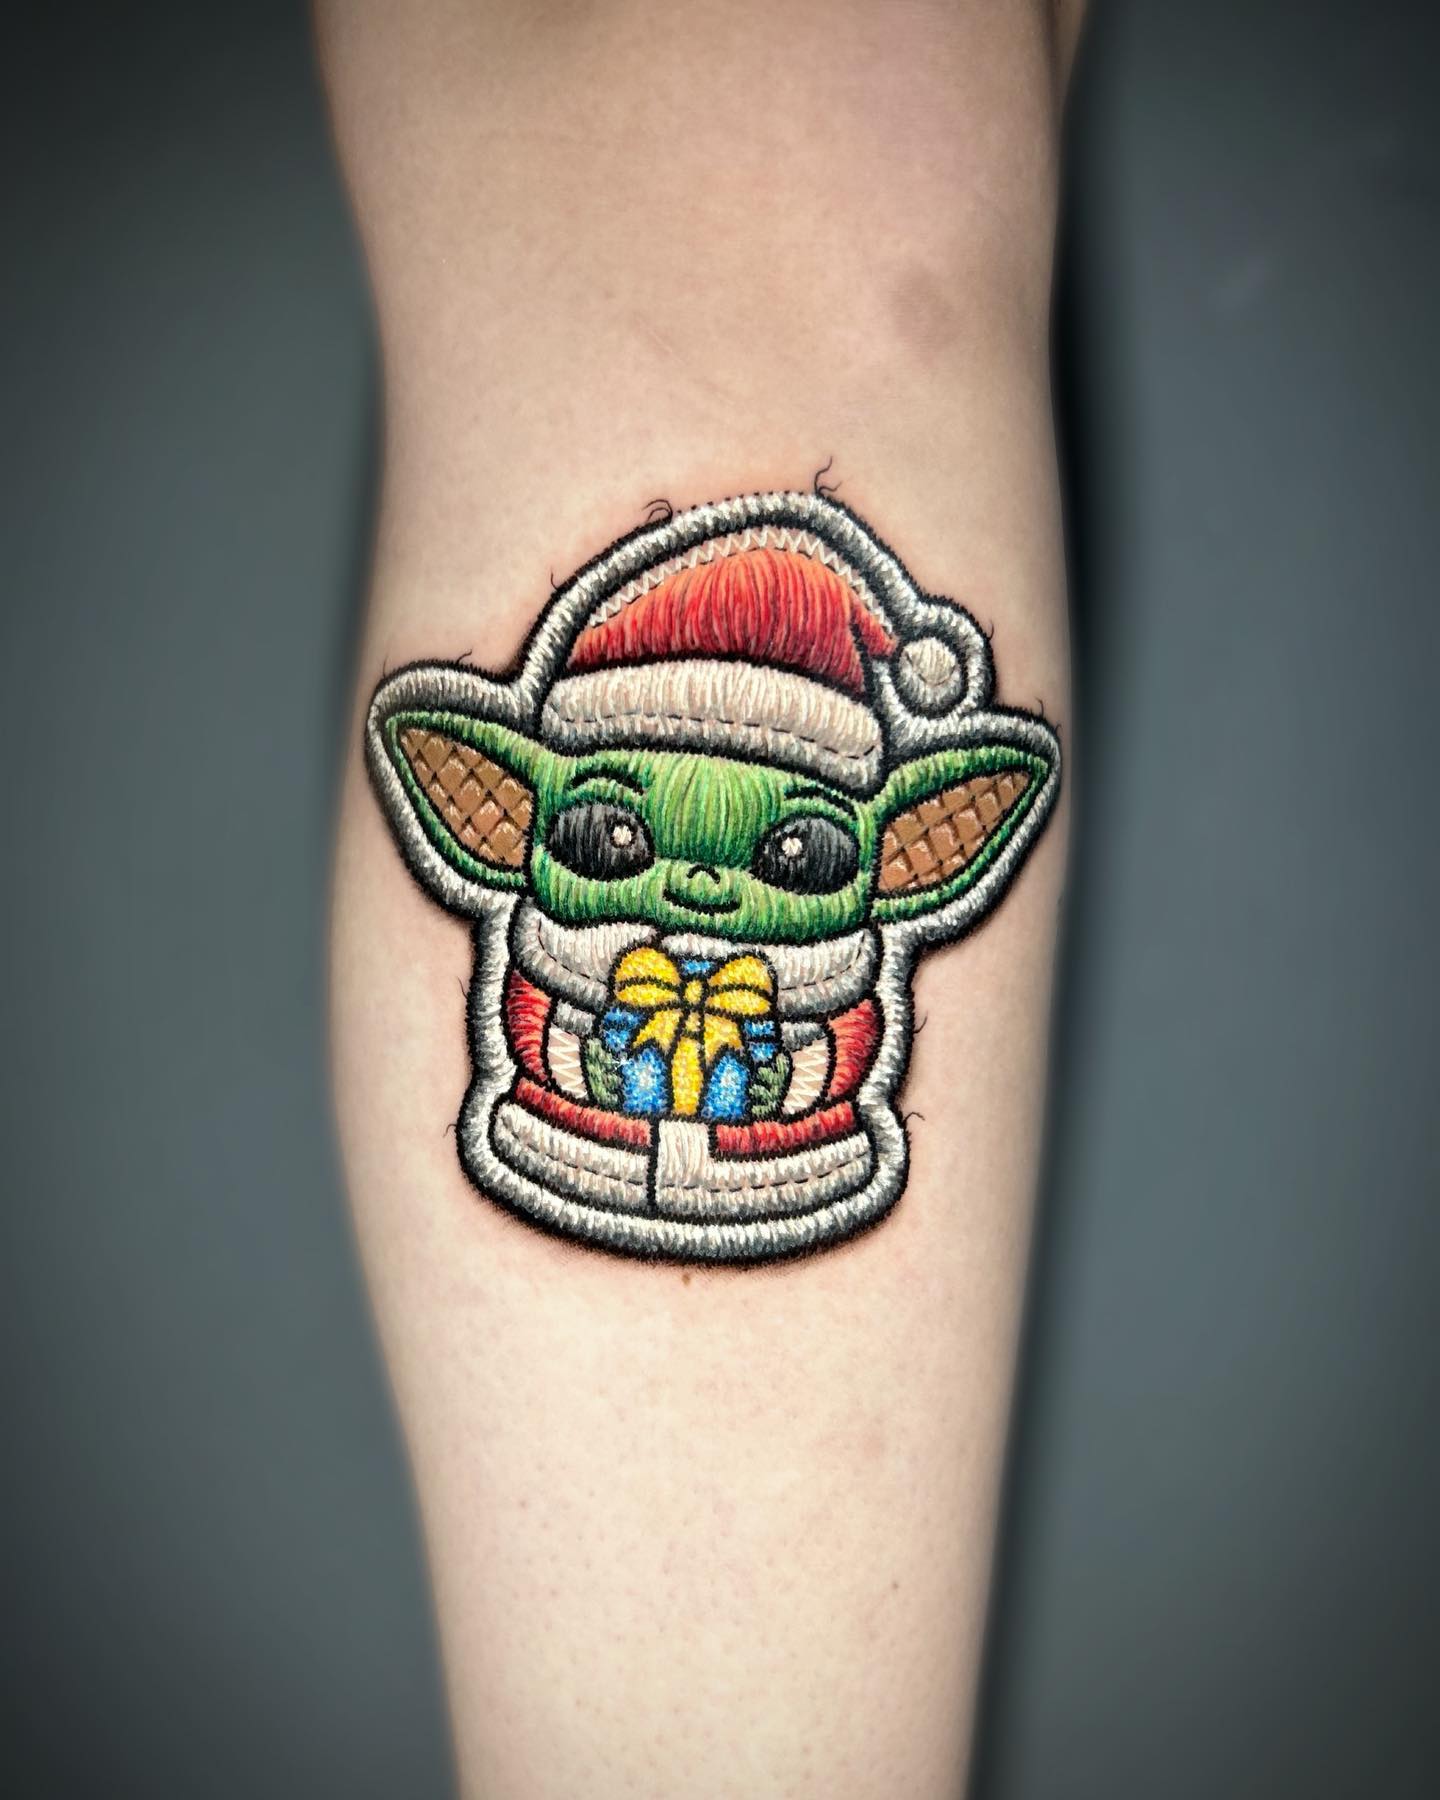 Master Yode embroidery tattoo